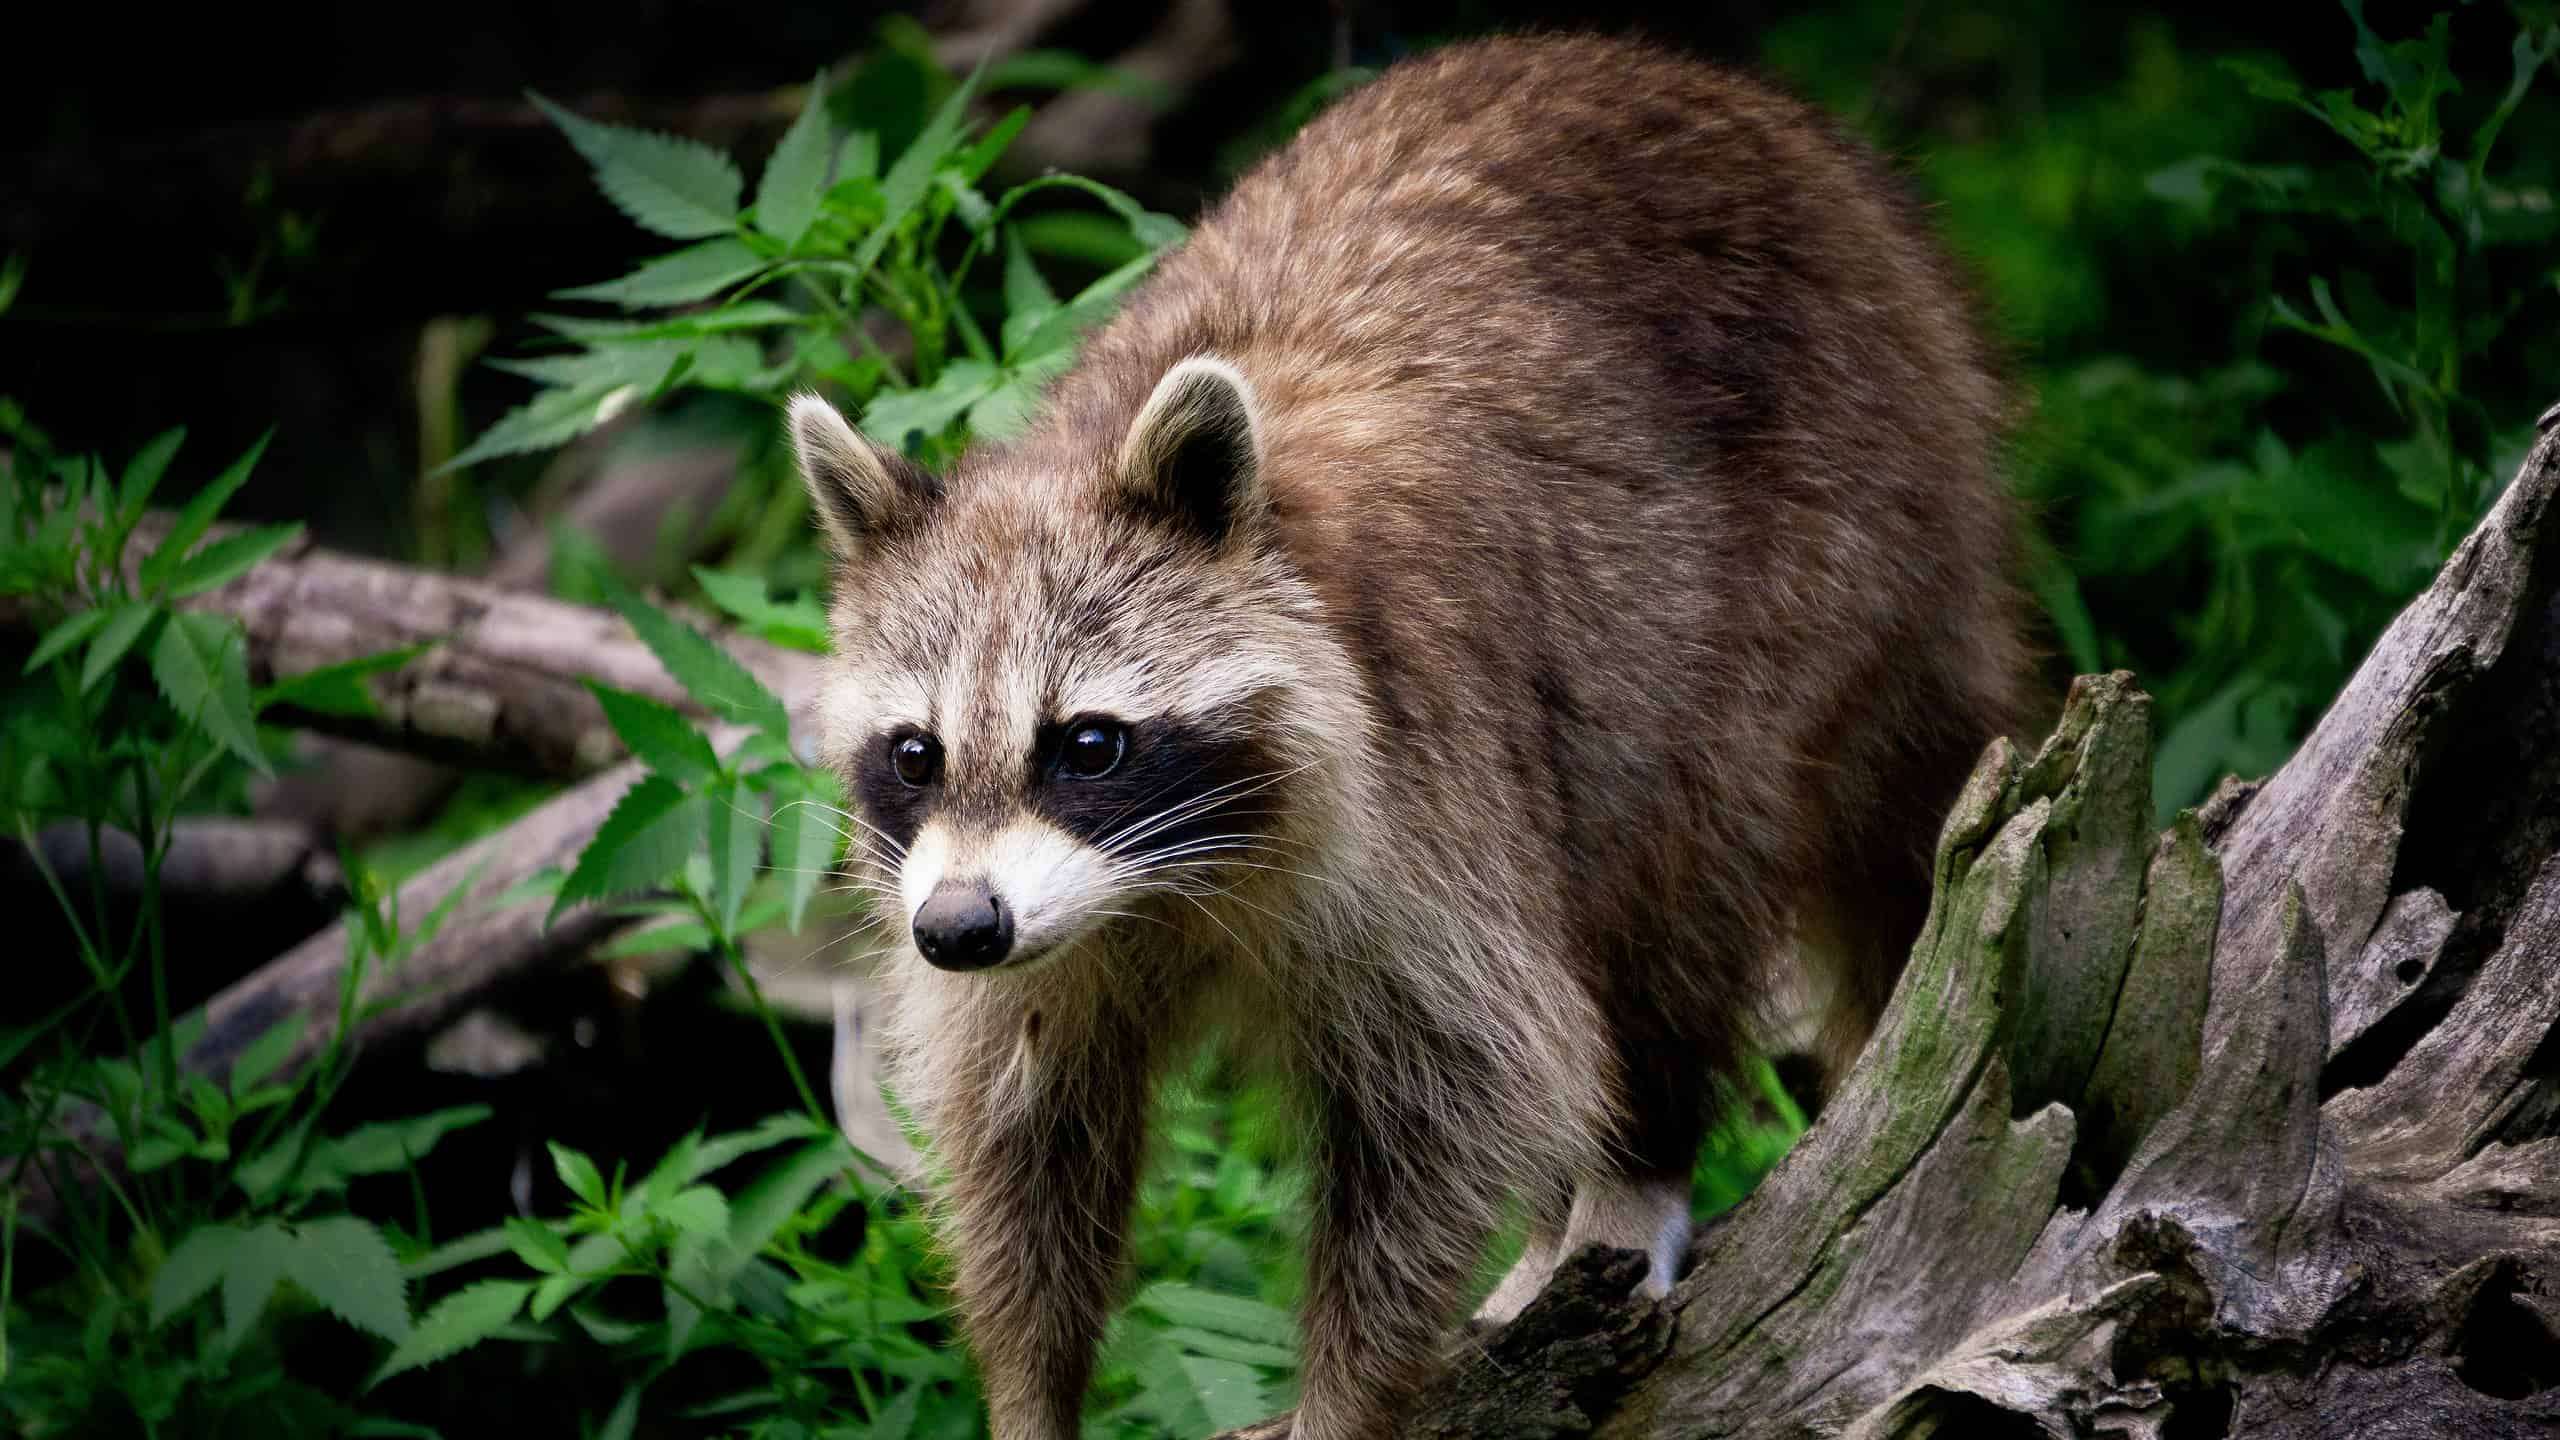 Racoon in undergrowth